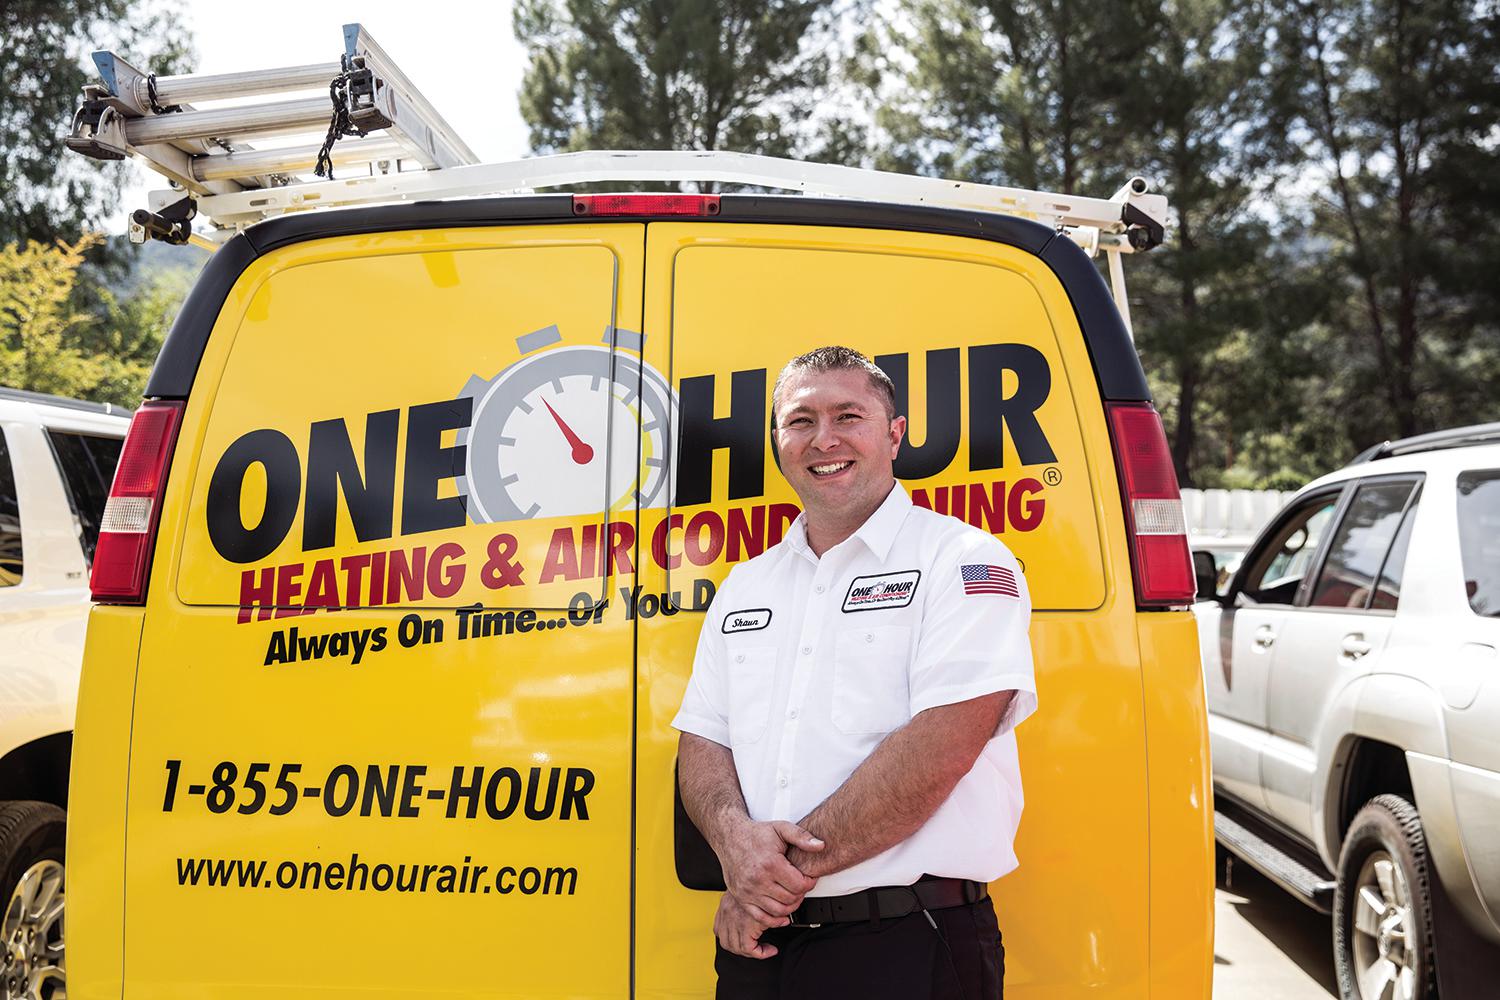 One Hour Heating & Air Conditioning Photo